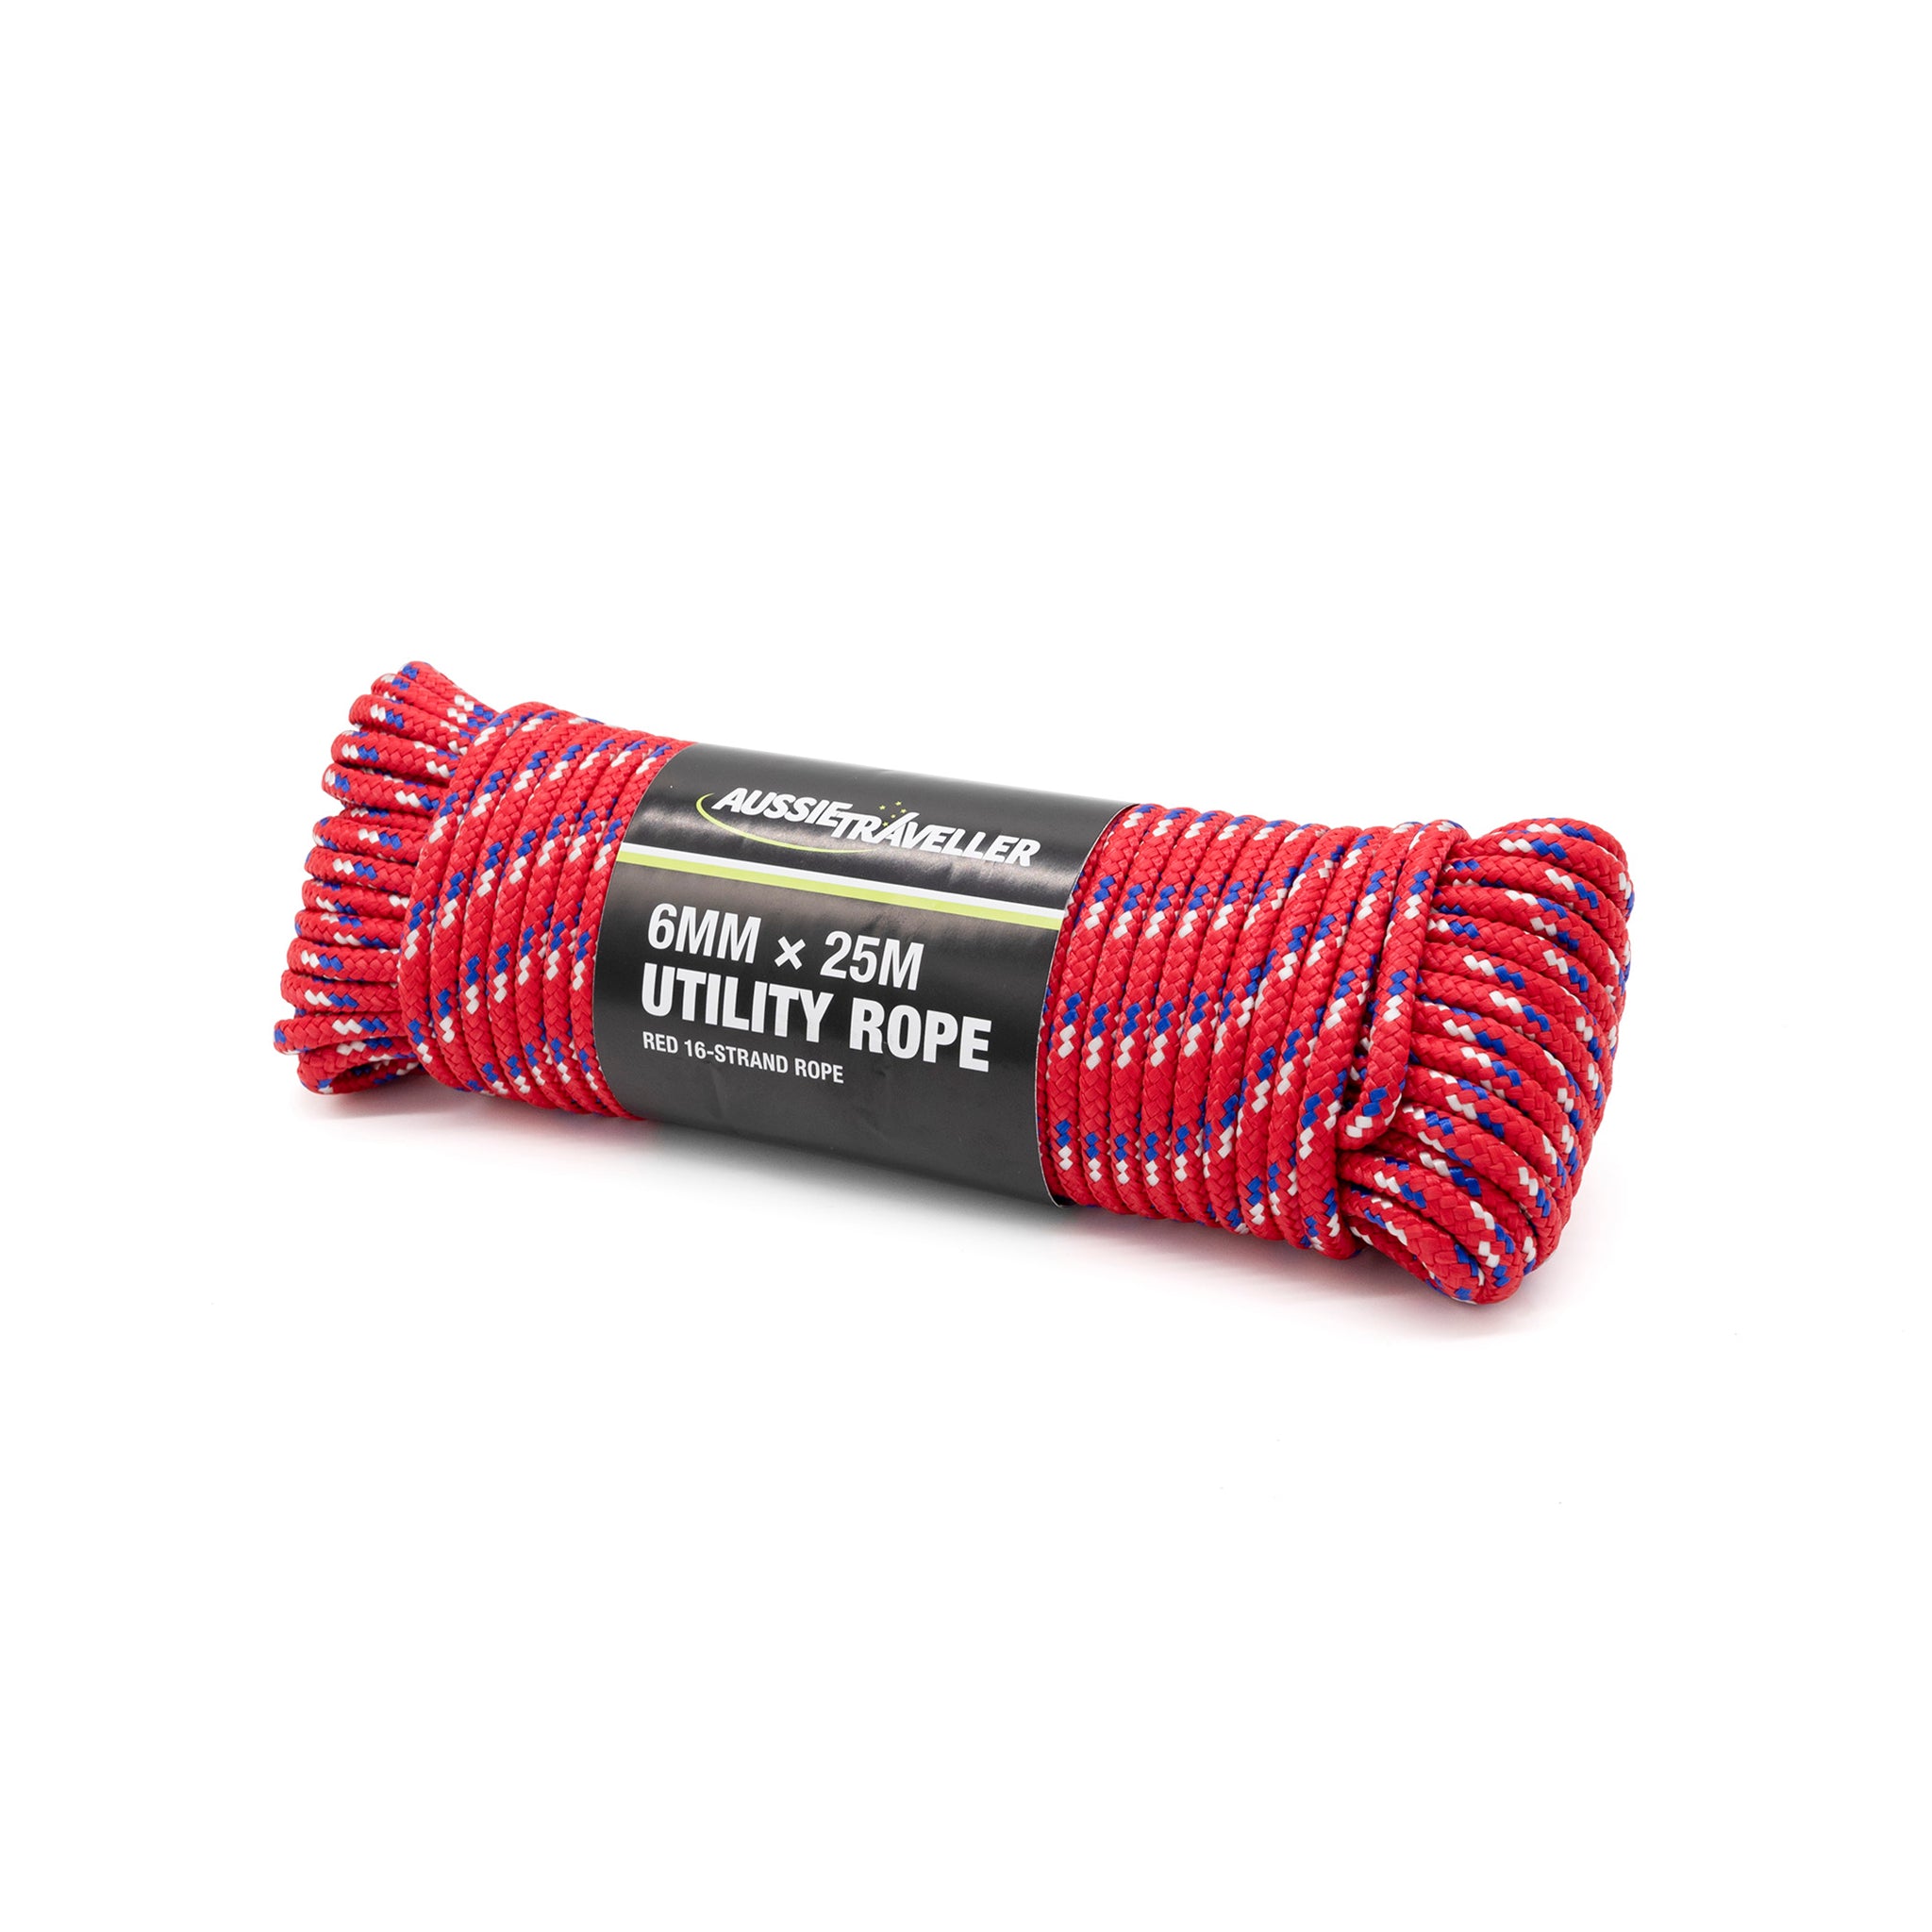 Utility Rope 6mm x 25m - Red Bundle @ A$14.99